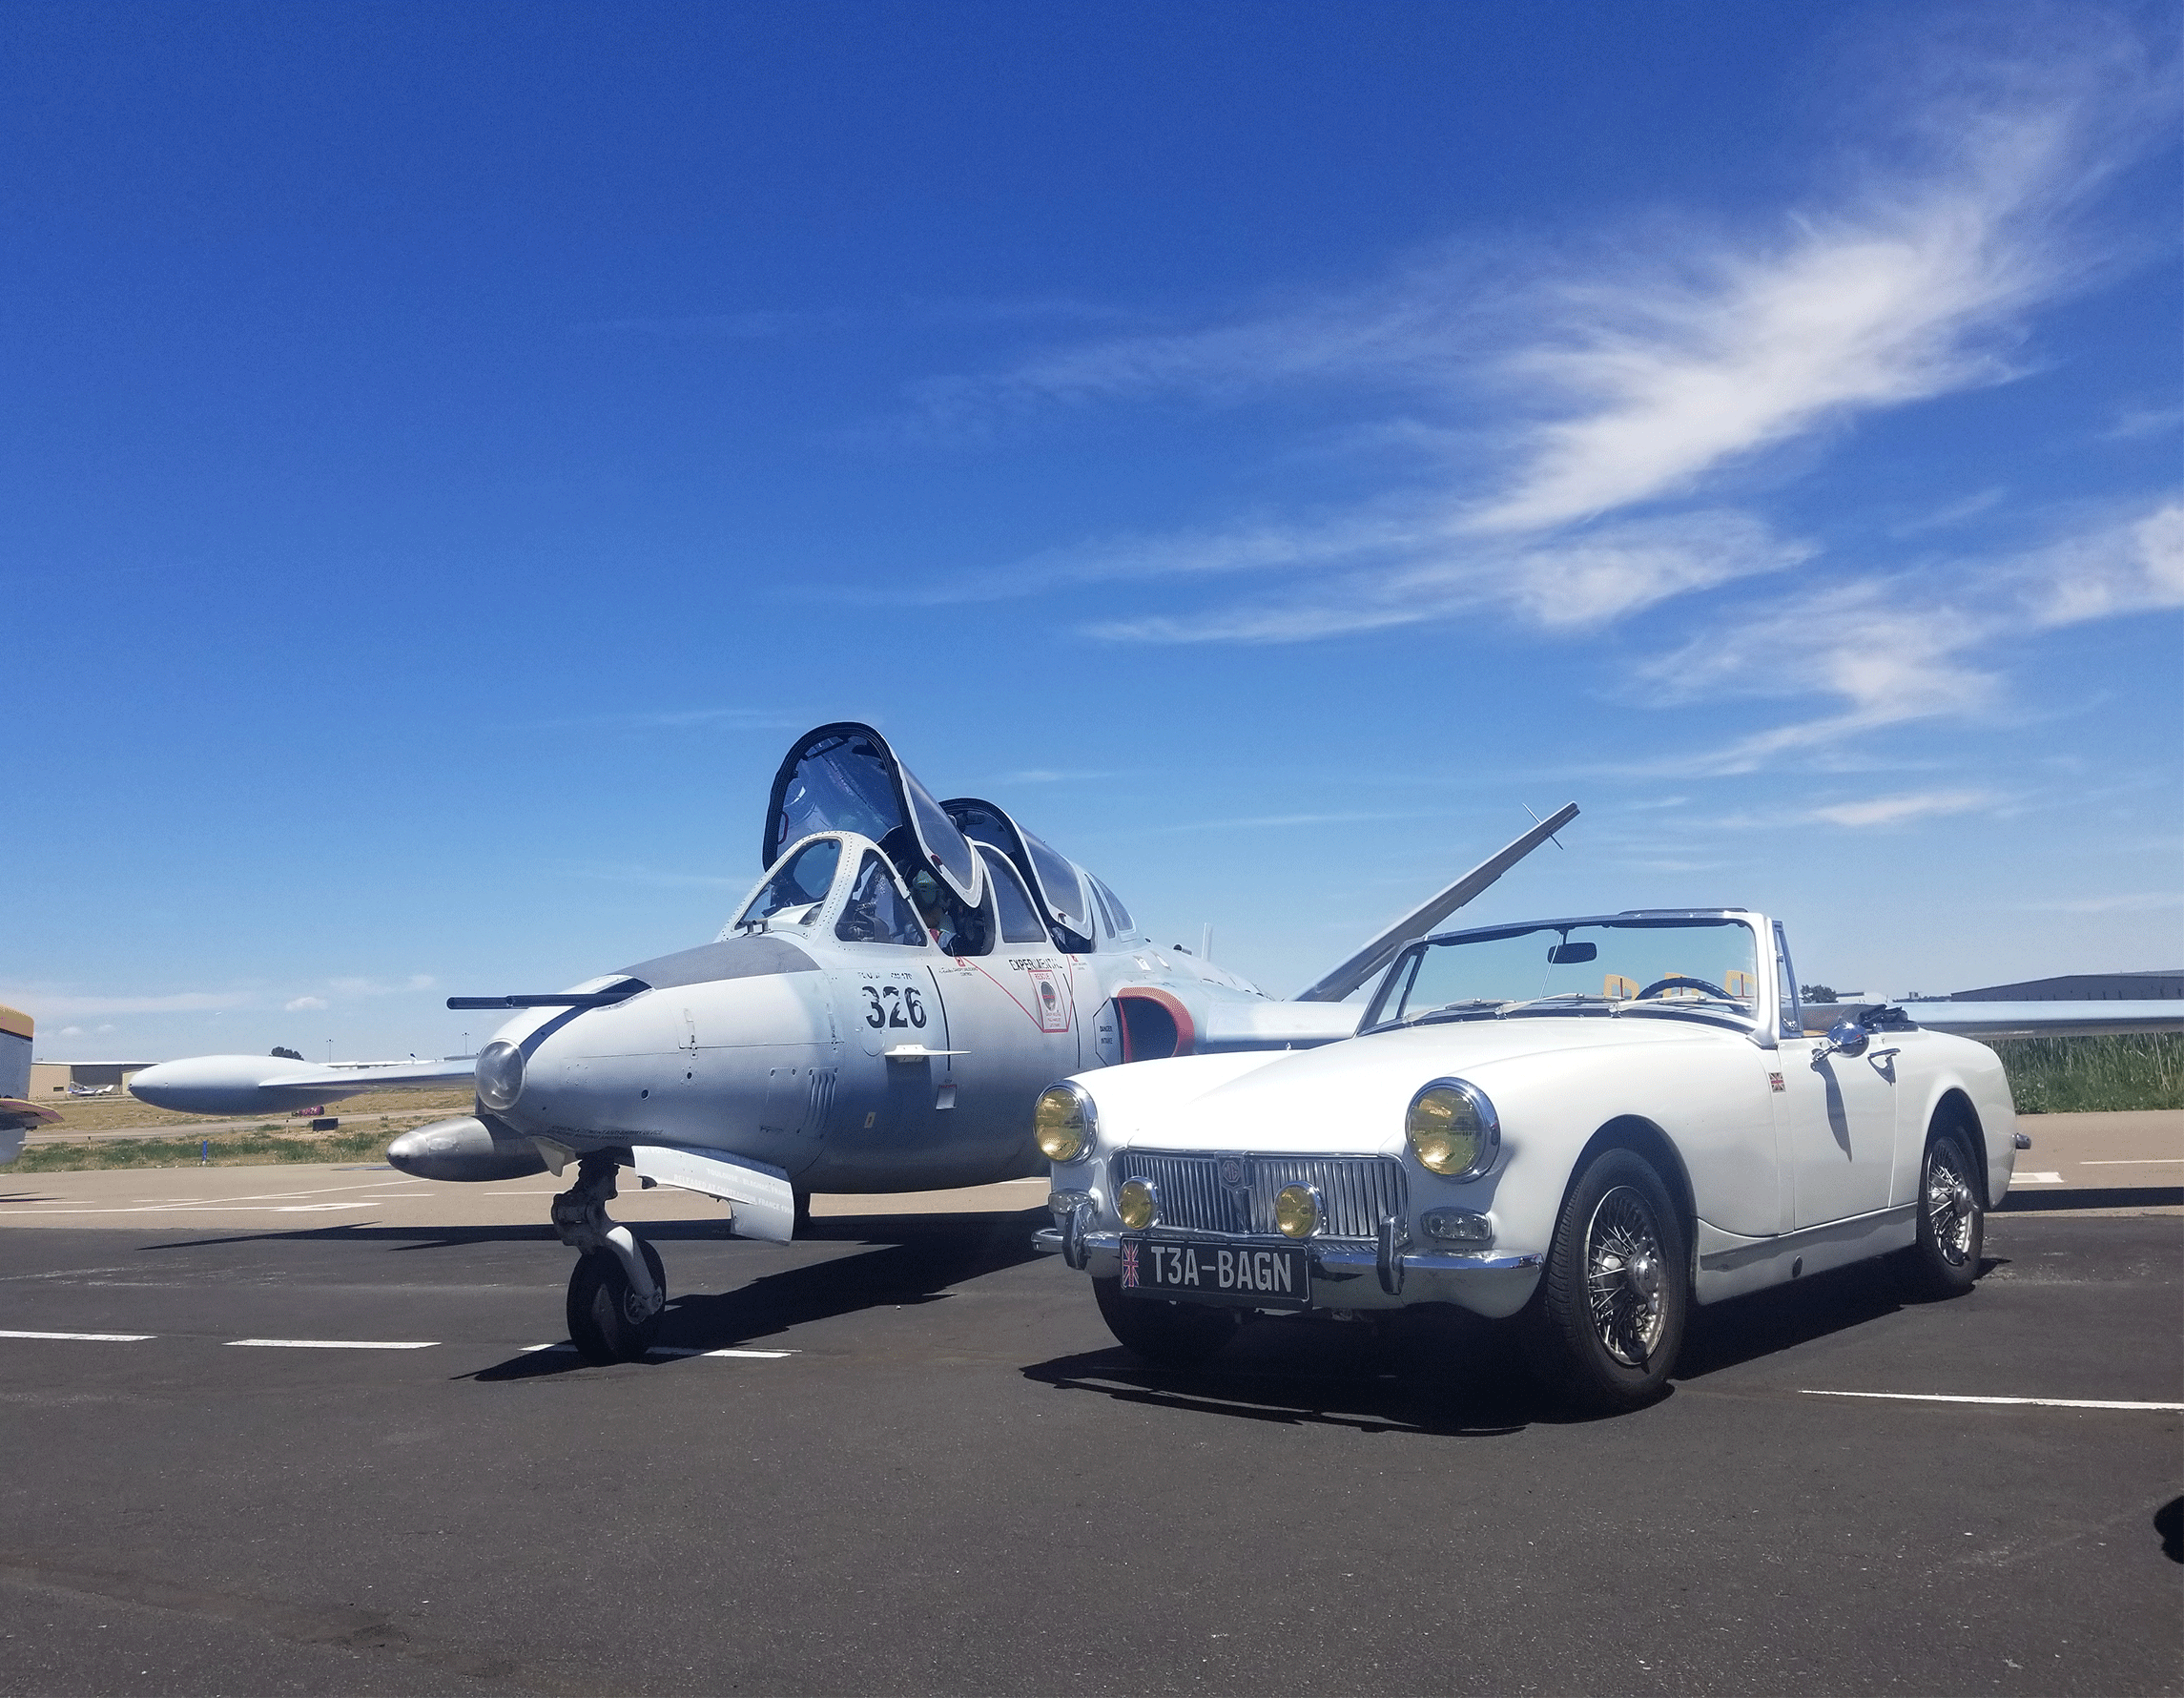 Vintage car next to airplane on the ramp